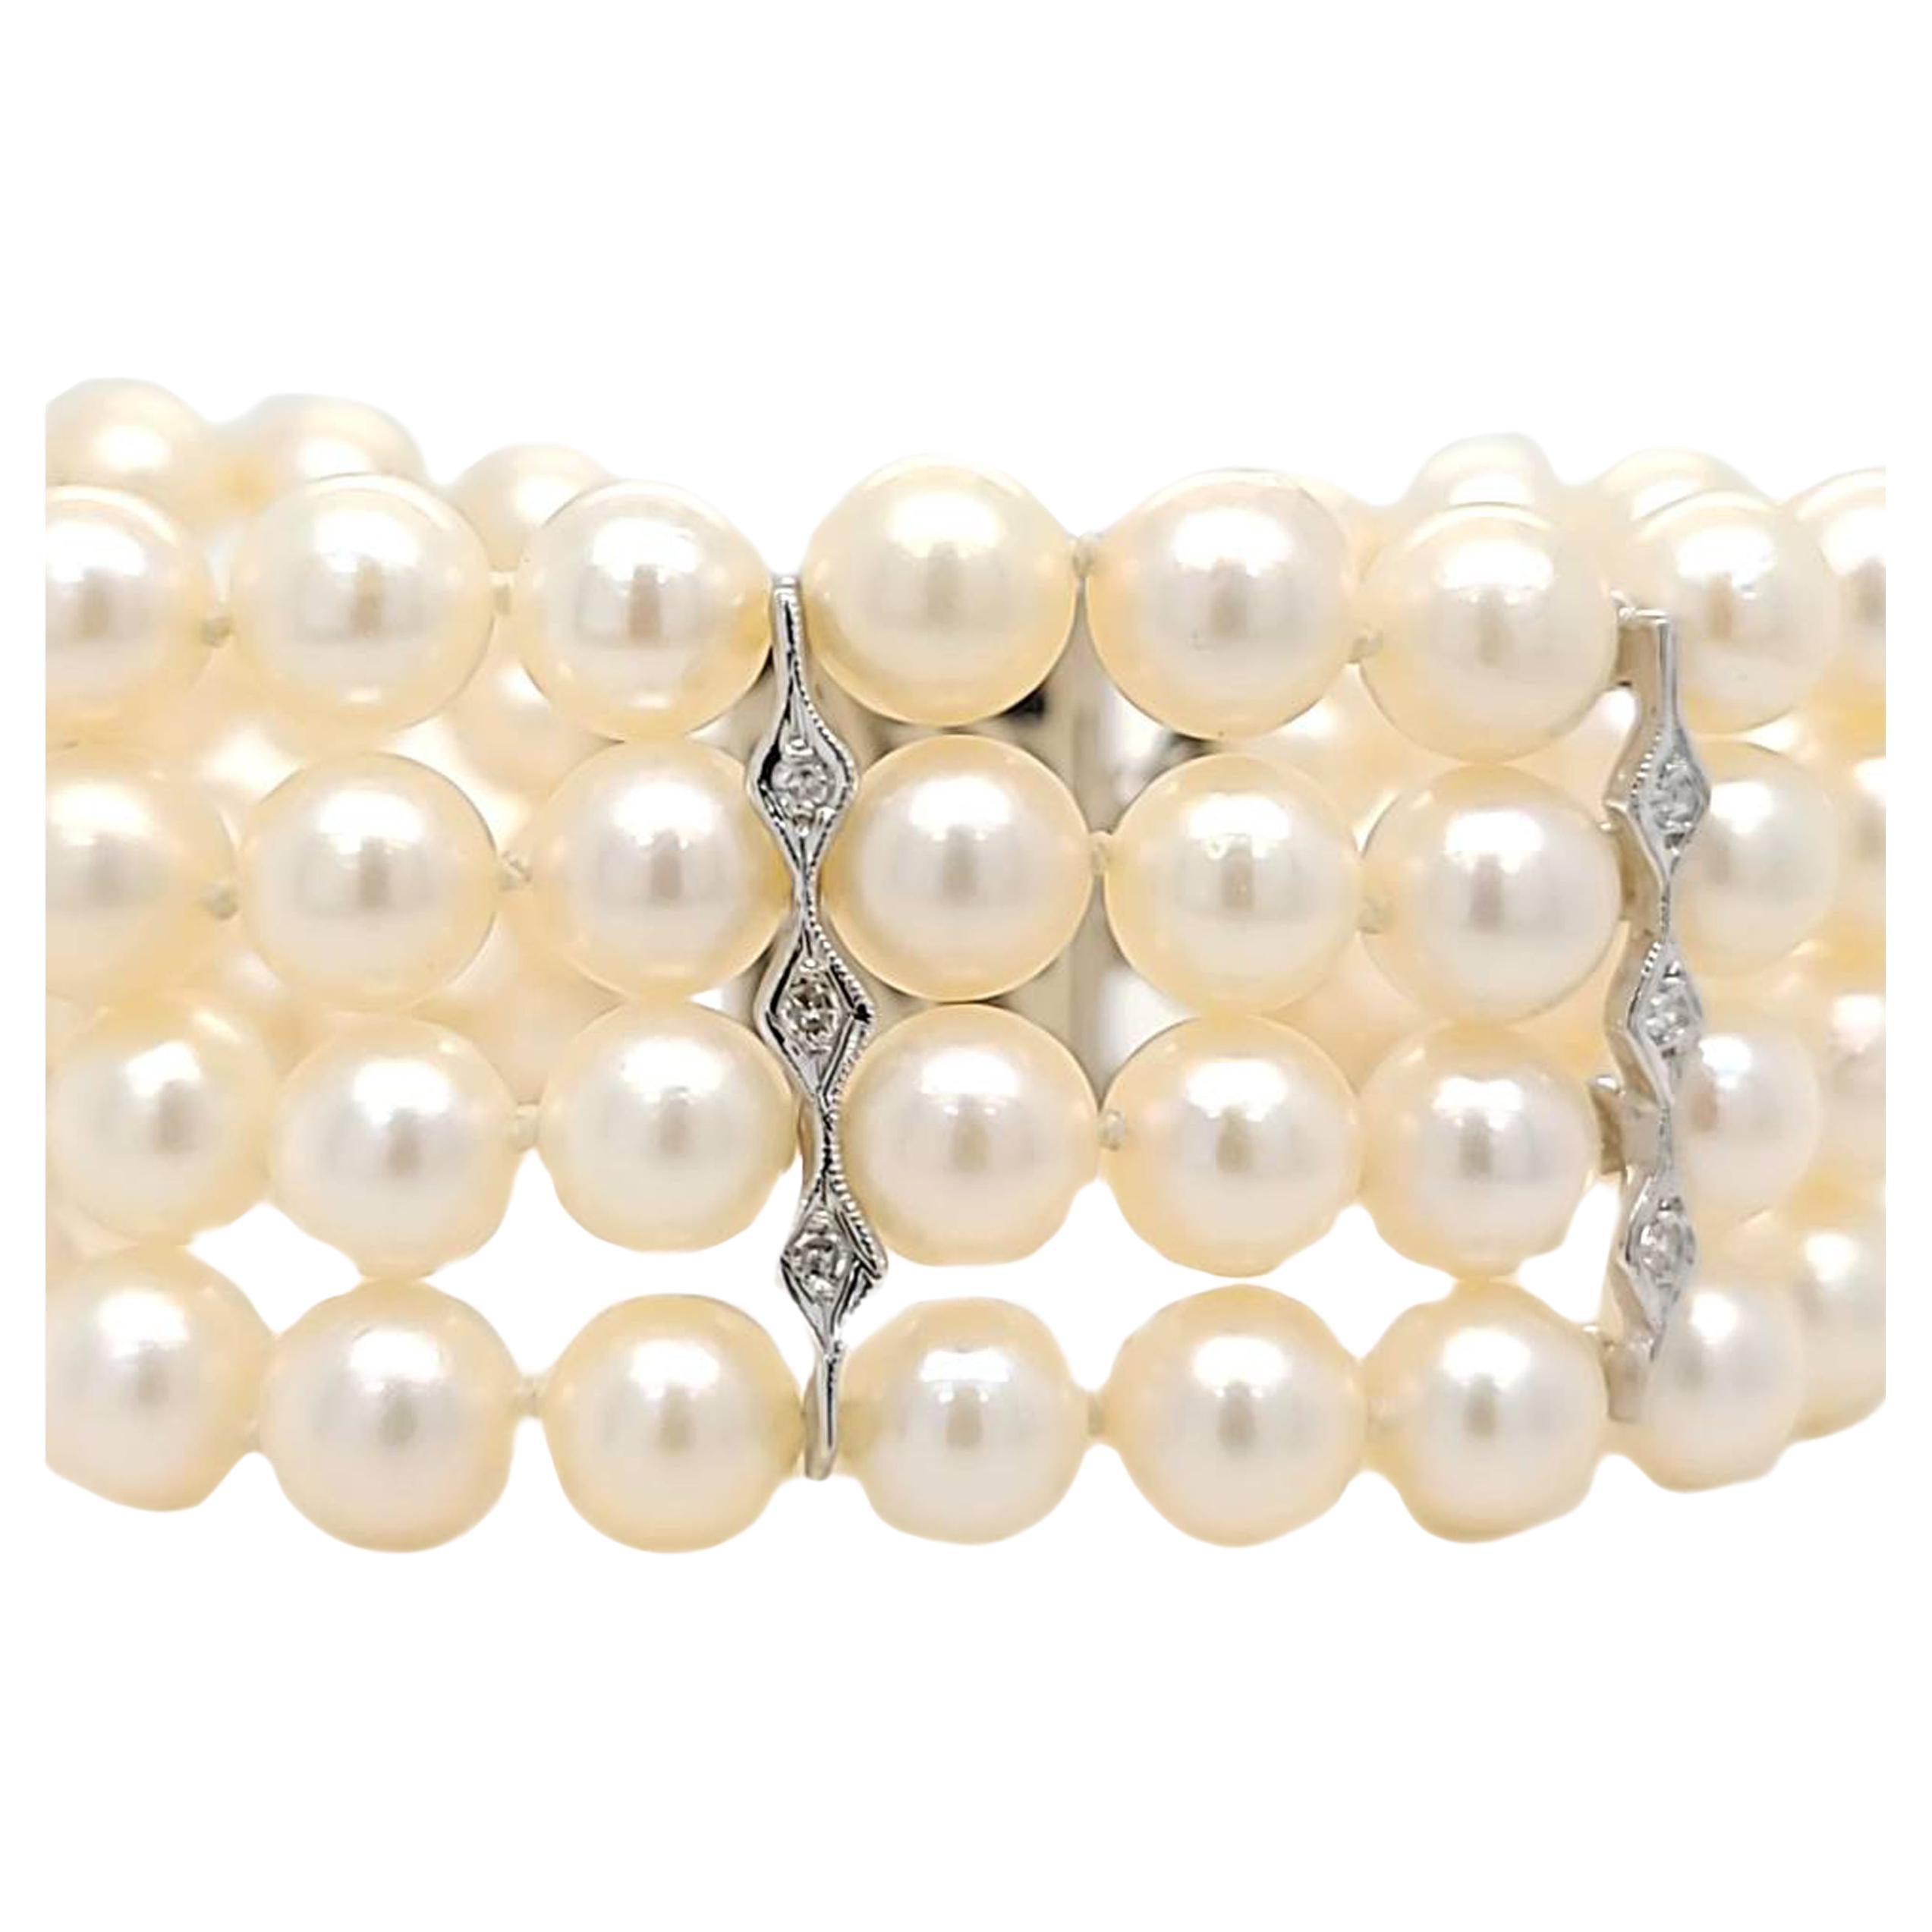 14 Karat White Gold 4 Strand Bracelet Featuring 84 Round Cultured Pearls Measuring 6.5mm to 7mm Accented by 15 Single Cut Diamonds of SI Clarity and G/H Color Totaling 0.15 Carats. 6.5 Inches Long with Box Clasp and Figure 8 Safety.